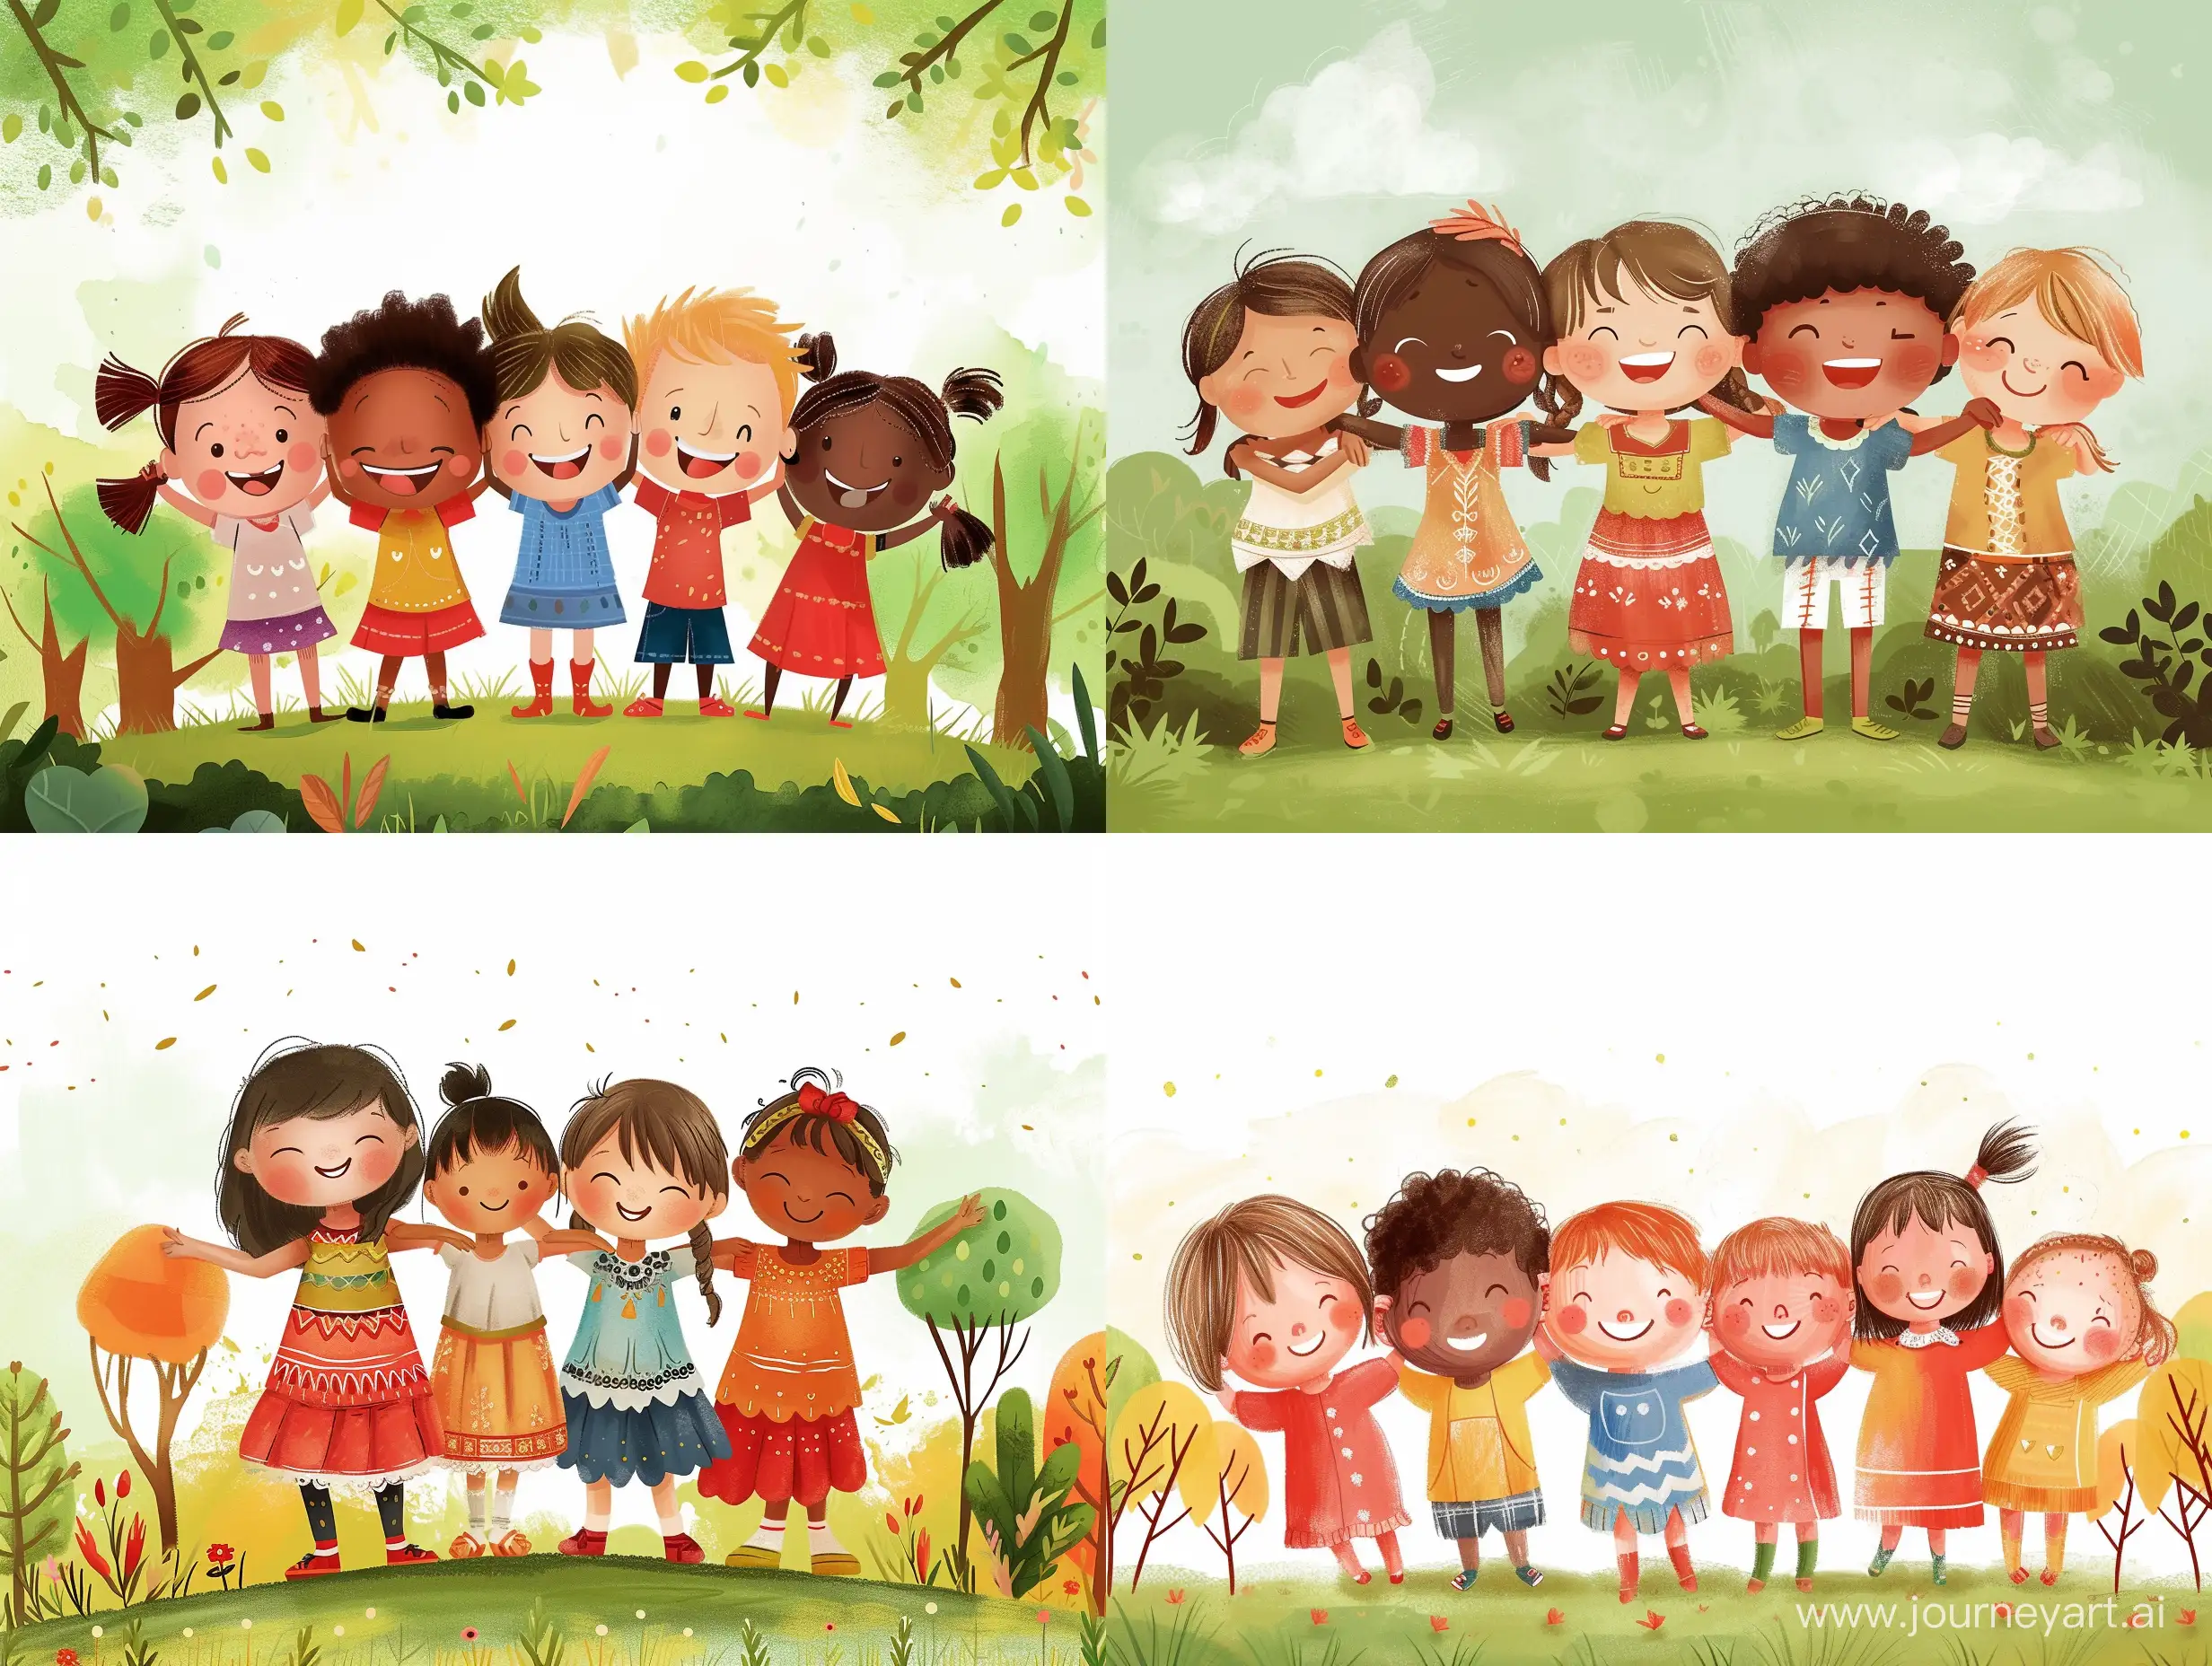 
kids from different nations with different color skins, smiling and their hands on each others shoulders, illustration style, style of pascal champions illustrations, not much details, not childish style, background should be some beautiful simple trees and grass on the bottom, 